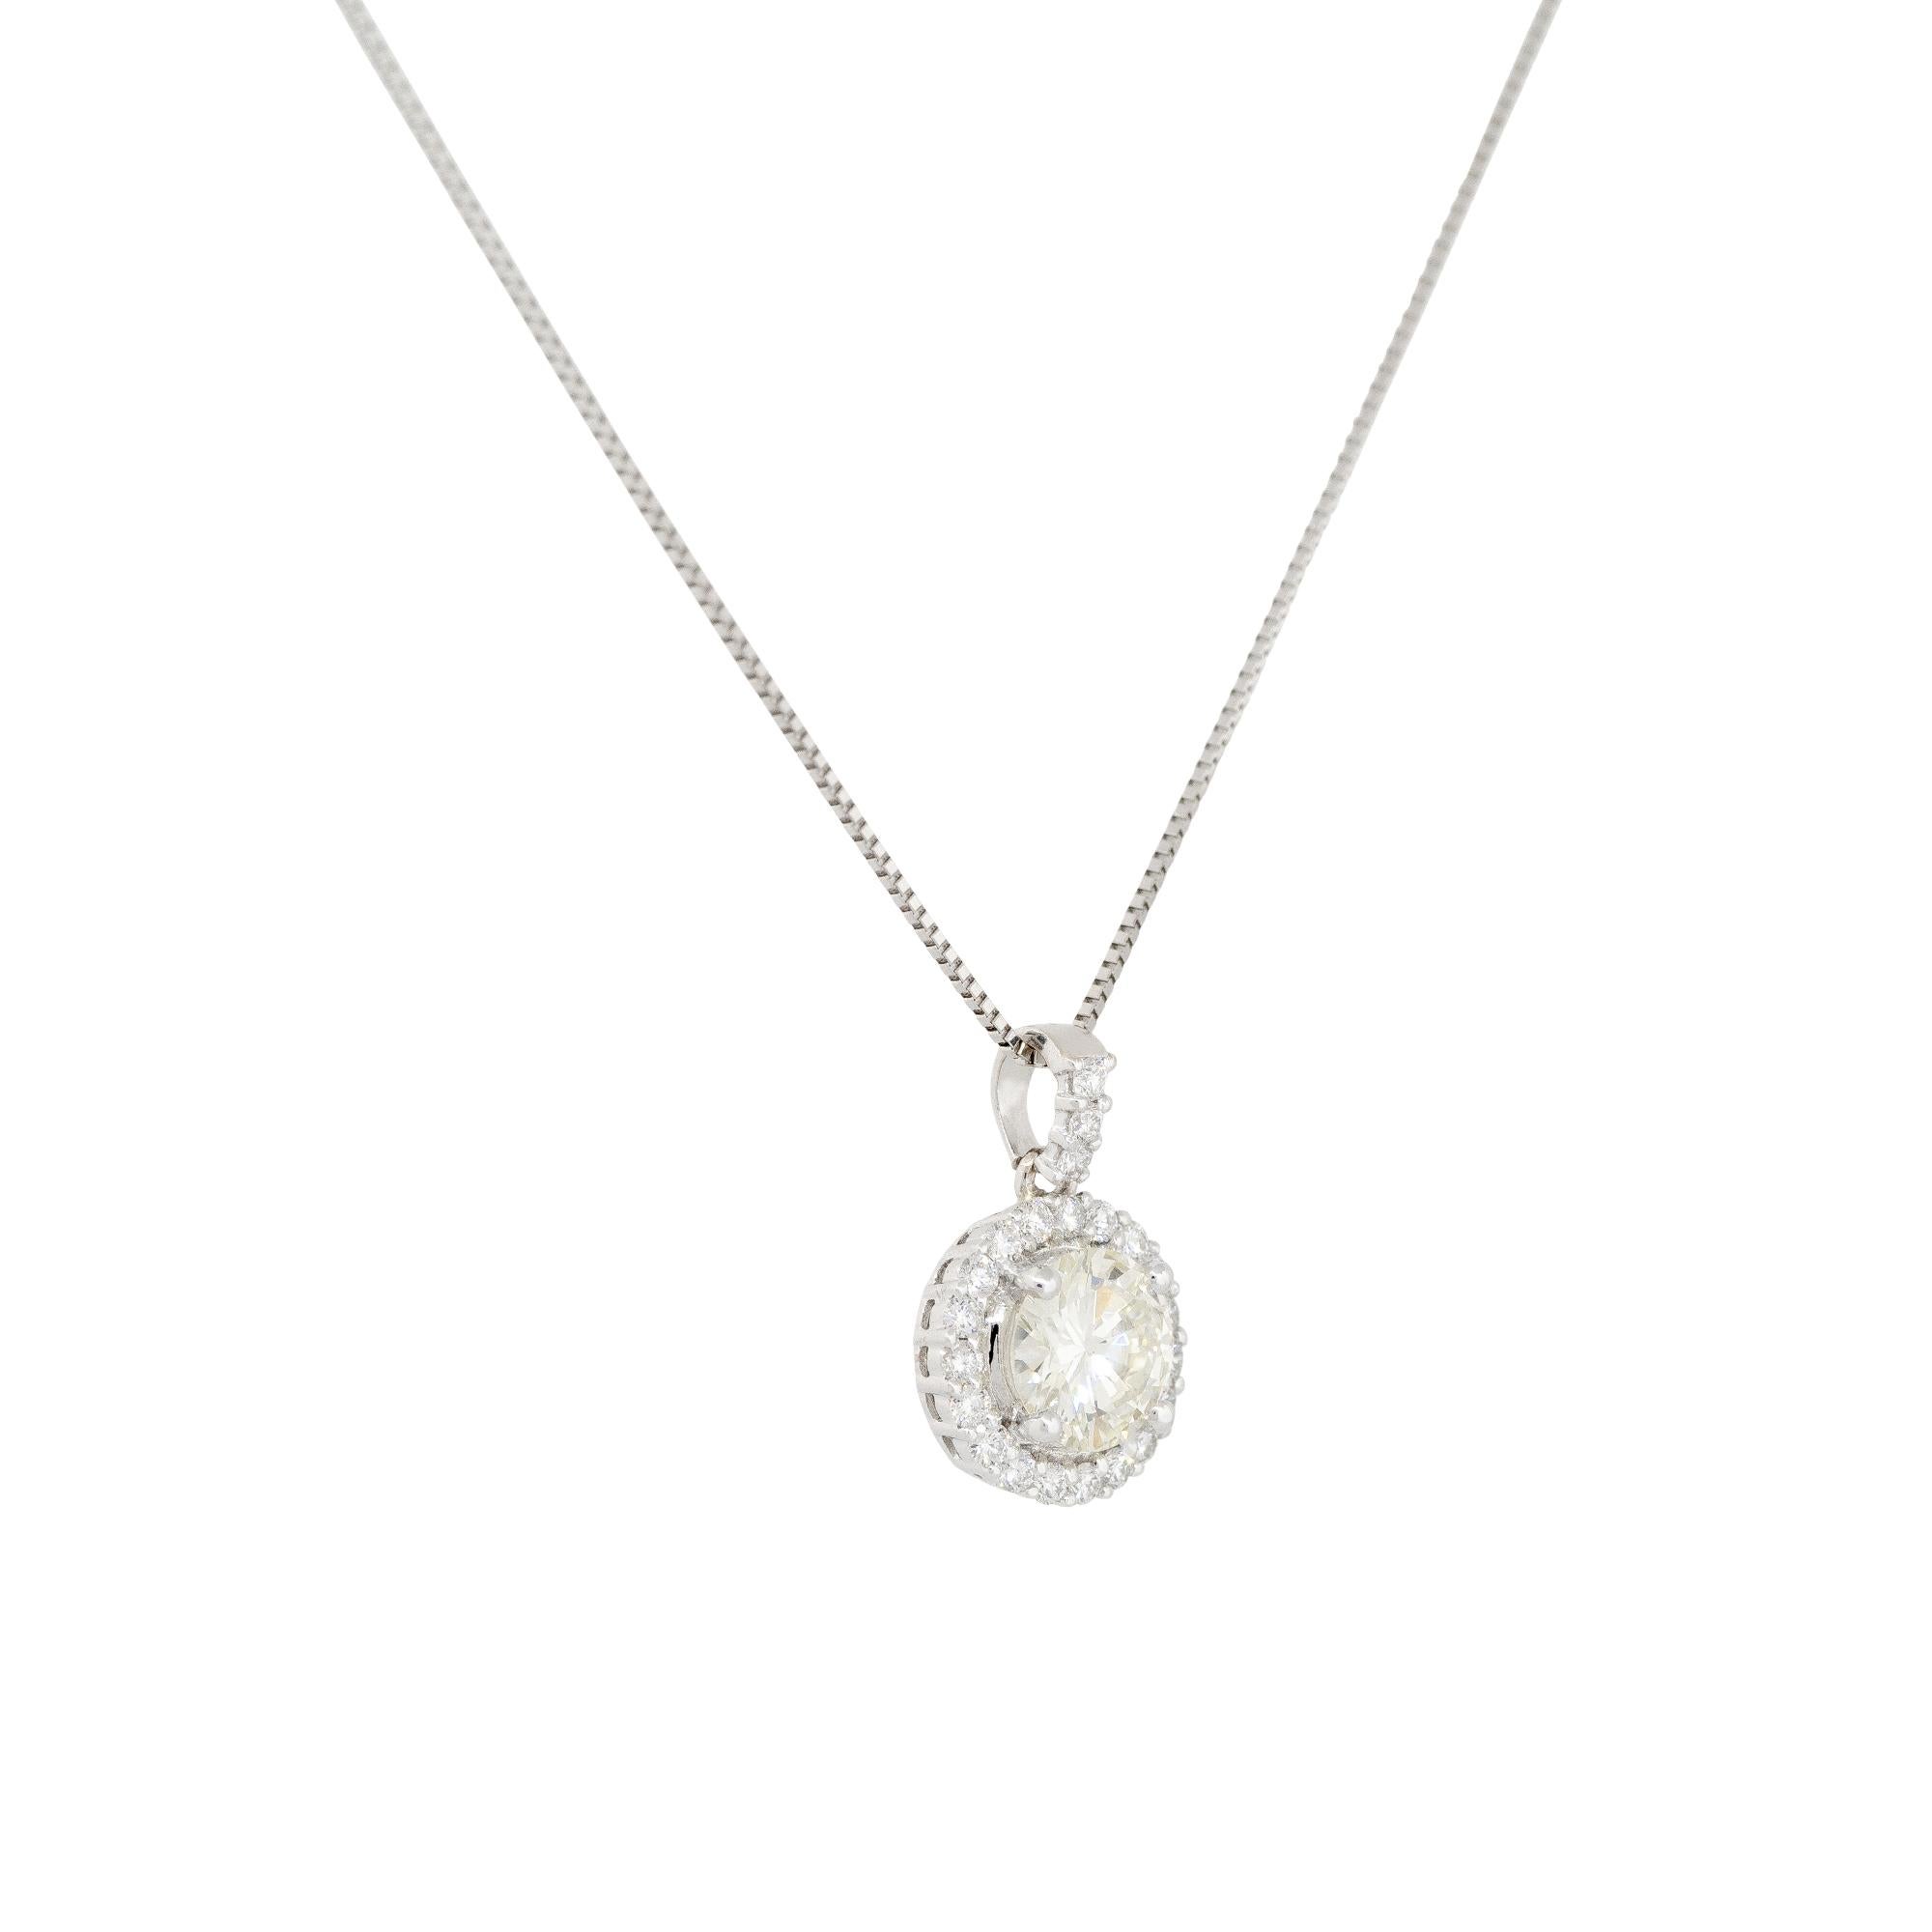 GIA Certified 18 Karat White Gold 1.40 Carat Total Weight Diamond Halo Necklace
Material: Pendant: 18k White Gold, Chain: Platinum
Main Diamond Details: The main stone is a 1.10ct Round Brilliant cut diamond. The diamond is certified by the